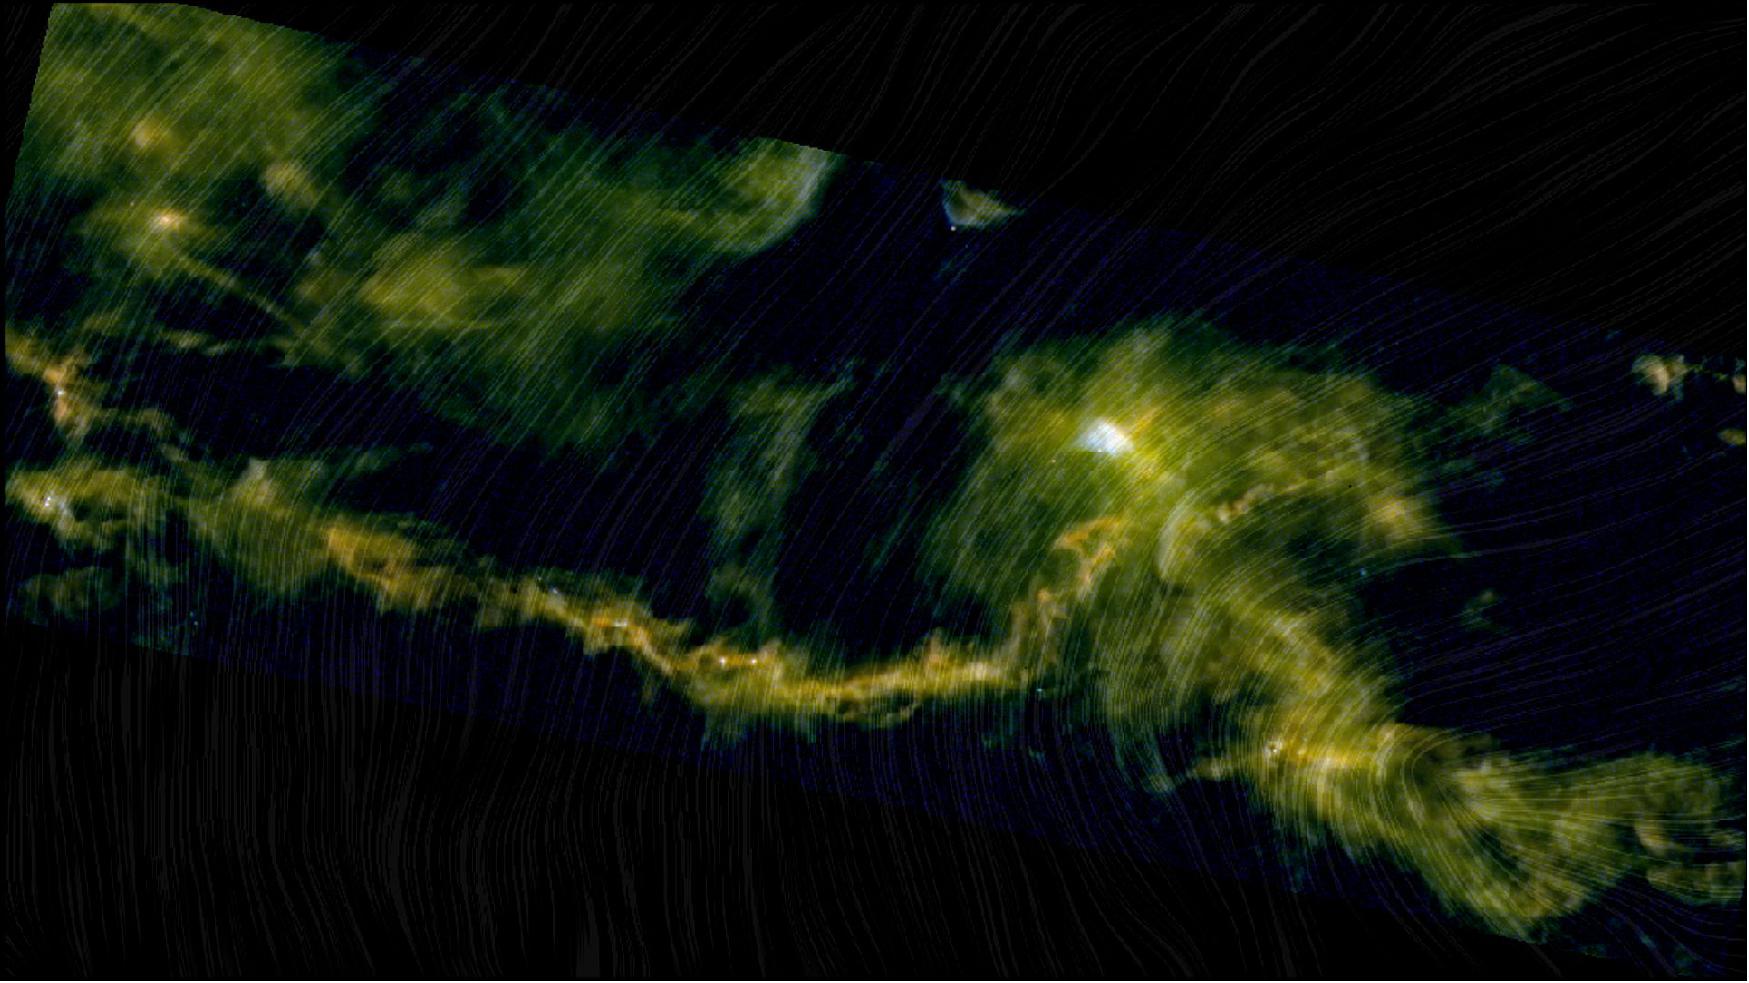 Figure 20: This image shows a section of the Taurus Molecular Cloud based on a combination of data from ESA’s Herschel and Planck space telescopes. The bright areas in the picture shows the emission by interstellar dust grains in three different wavelengths observed by Herschel (250, 350, and 500 µm) and the lines crossing the image in a ‘drapery pattern’ represent the magnetic field orientation (based on the Planck data). This molecular cloud is one of the closest regions of star formation, at around 450 light years from us, and is known to contain more than 250 young stellar objects. The section in this image shows the archetypical example of a filament in a star-forming cloud. The main filament that stretches from the left of the image and curves up to the hub is known as the Lynds Dark Nebula 1495 (L1495). L1495 contains several Barnard Dark Nebulae, which are dust-filled regions cataloged by astronomer Edward Bernard in 1919 and known as Barnard Objects. Dark nebulae are extremely dense regions of dust that obscure visible light. The central bright region is known as B10, with B211 and B213 stretching out from the bright area. The B213/L1495 nebula is a clear example of a star-forming region where the magnetic field lines are perpendicular to the main filament, and also contains striations, or material that appears perpendicular to the filament (image credit: ESA/Herschel/Planck; J. D. Soler, MPIA)